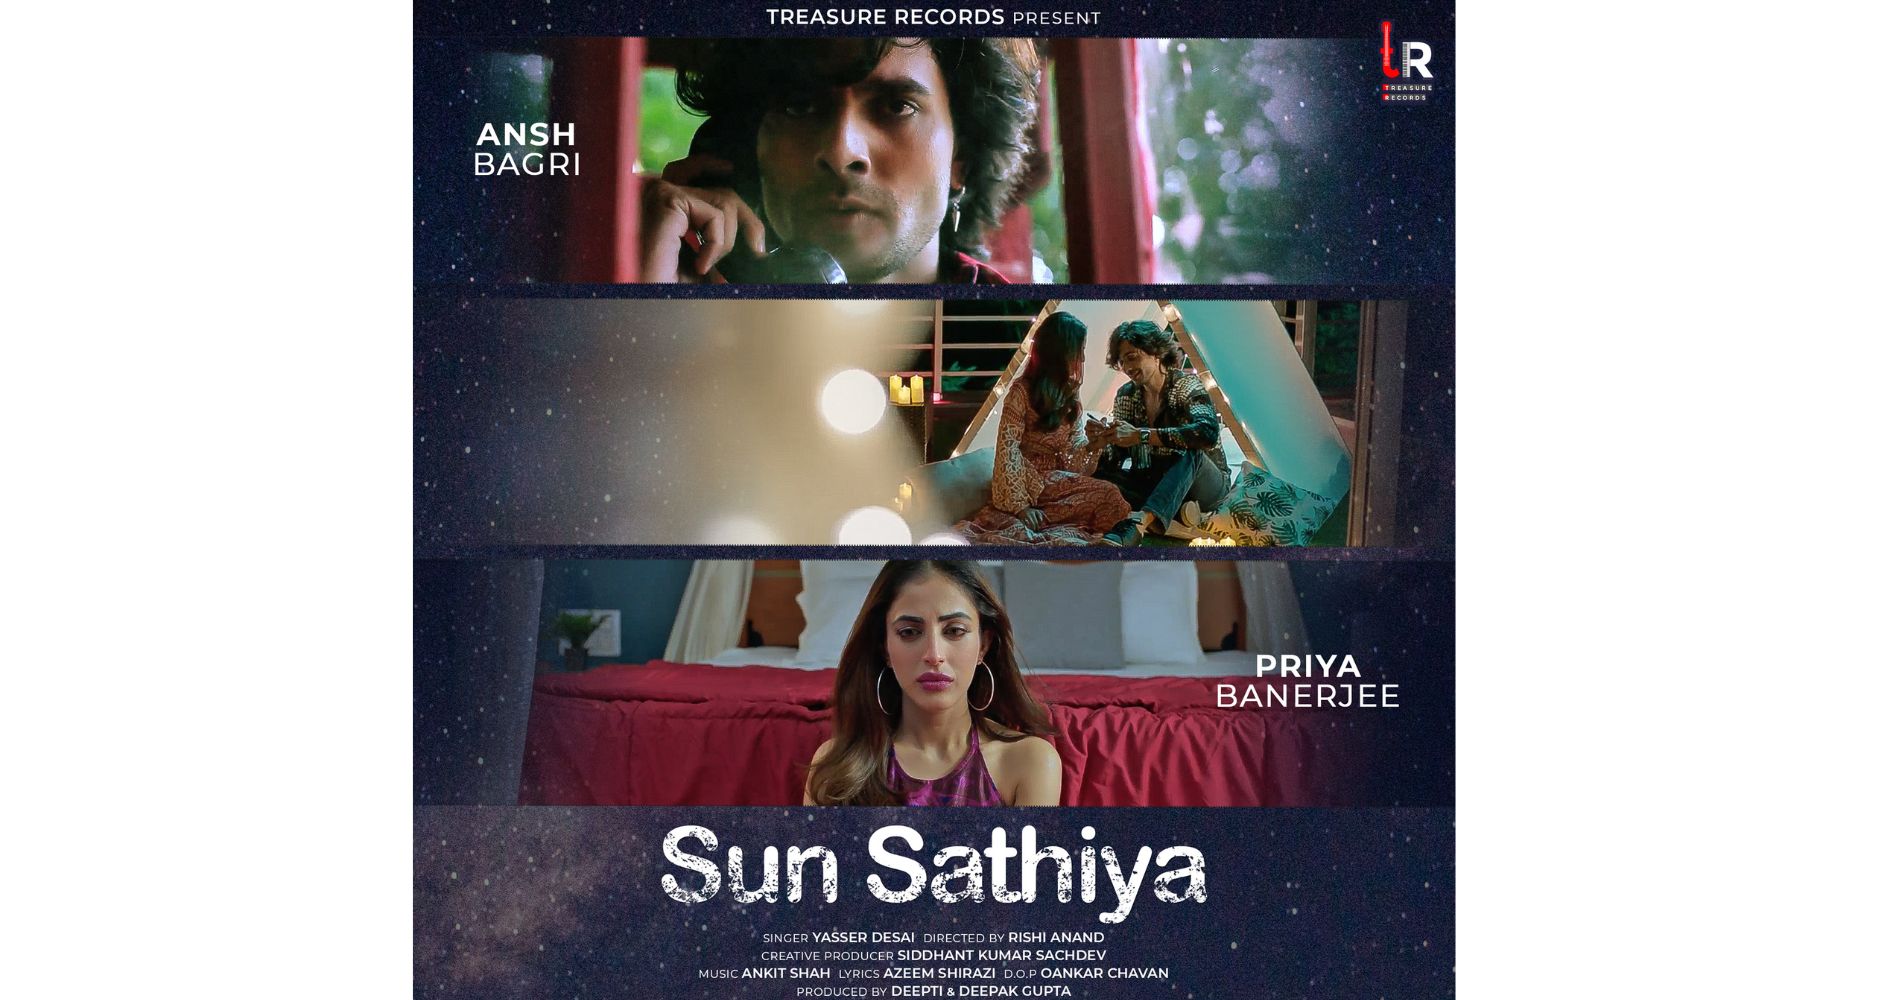 Yasser Desai Releases His New Song “Sun Sathiya” With Treasure